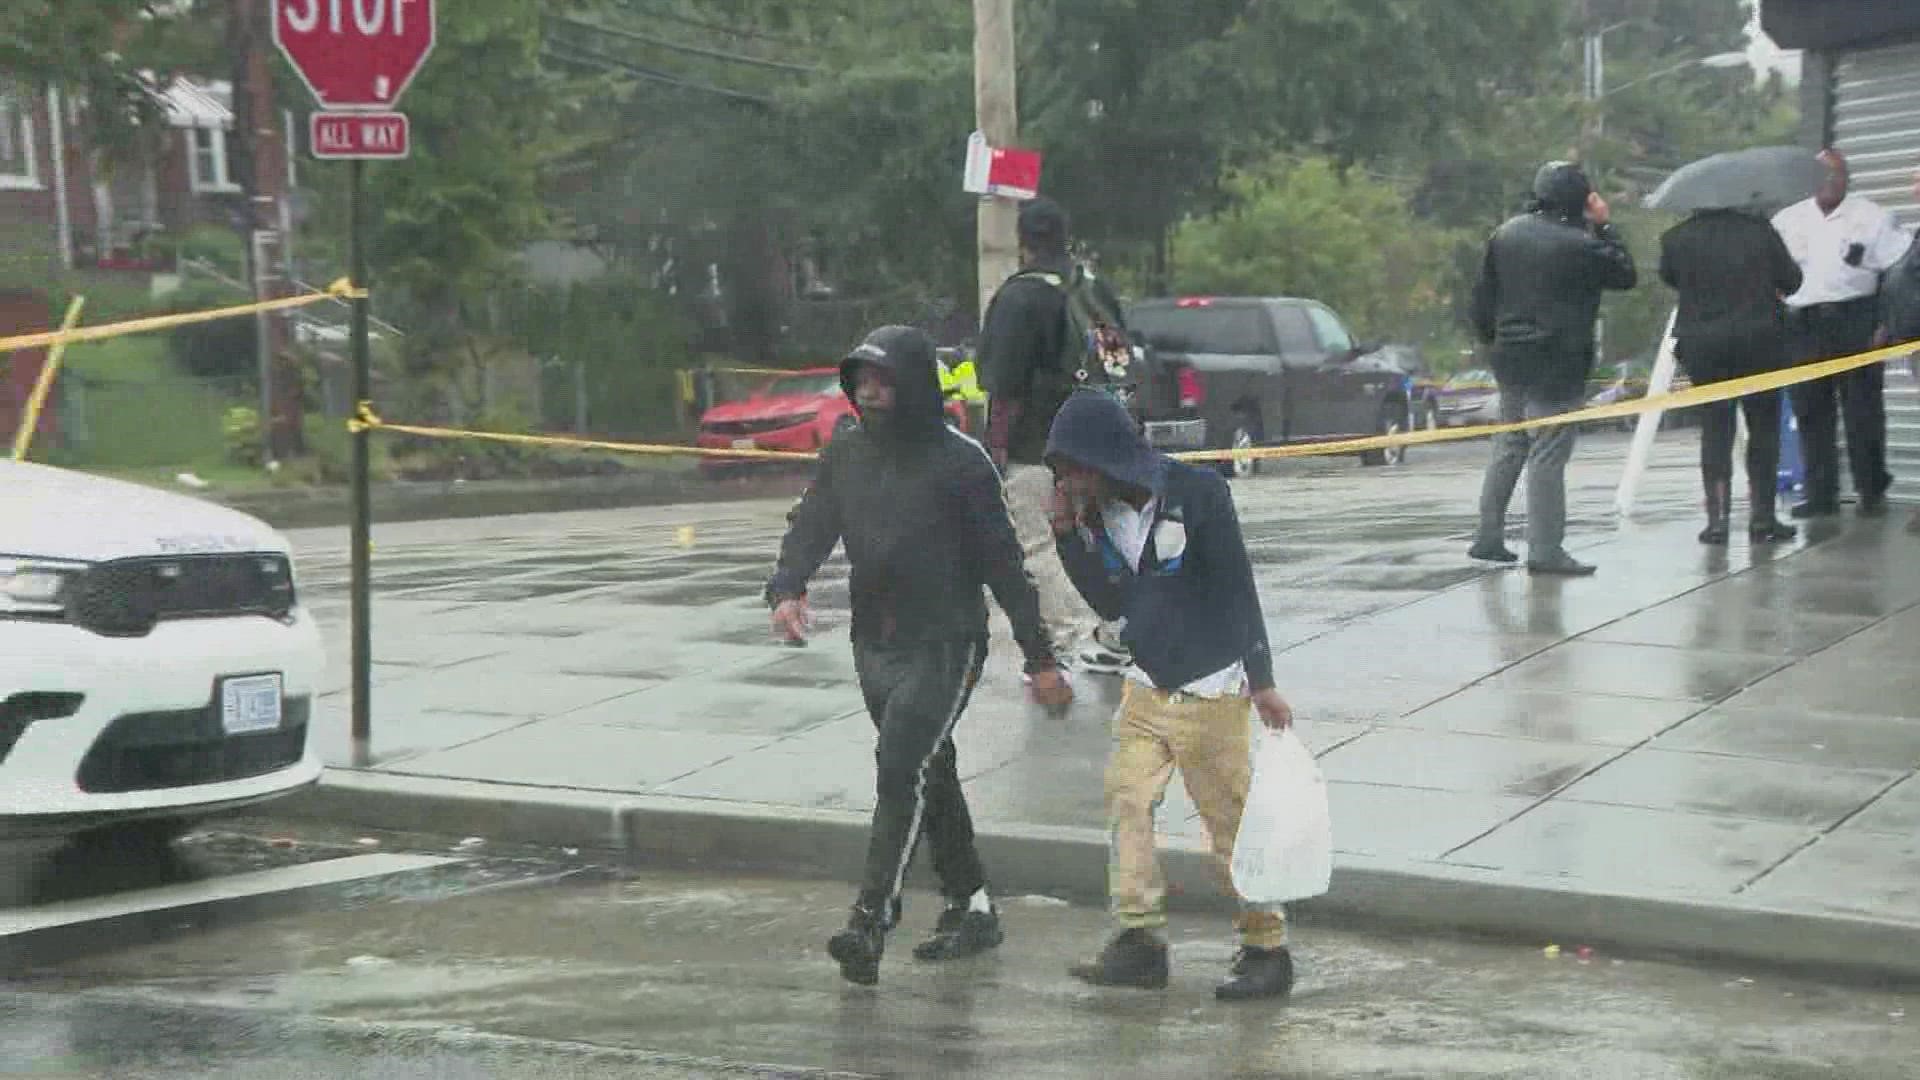 DC police have confirmed four men have been shot.
This happened a short time ago near 6th and Chesapeake Streets.